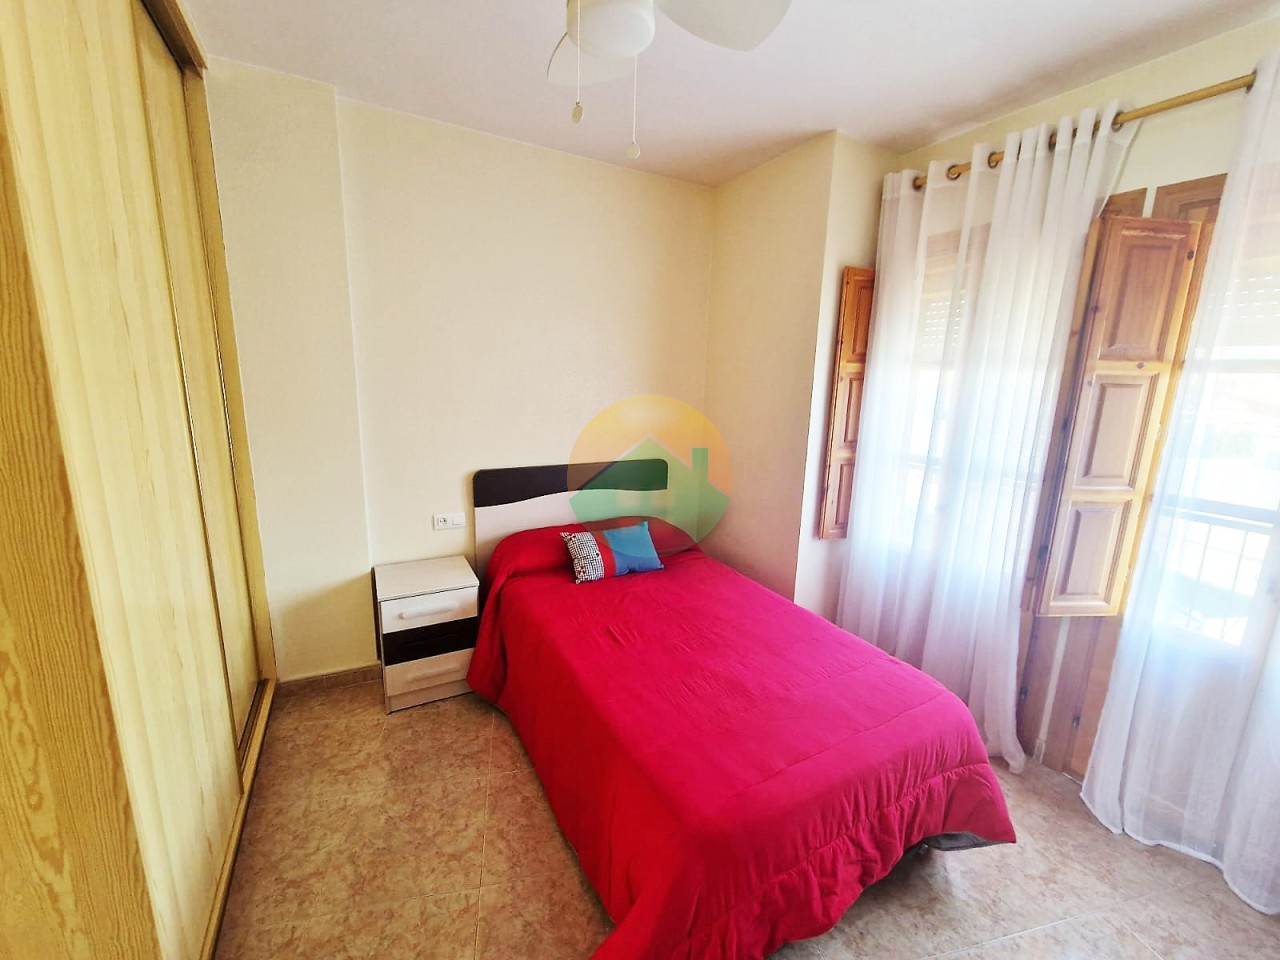 3 bedroom Terraced For sale in Aguilas